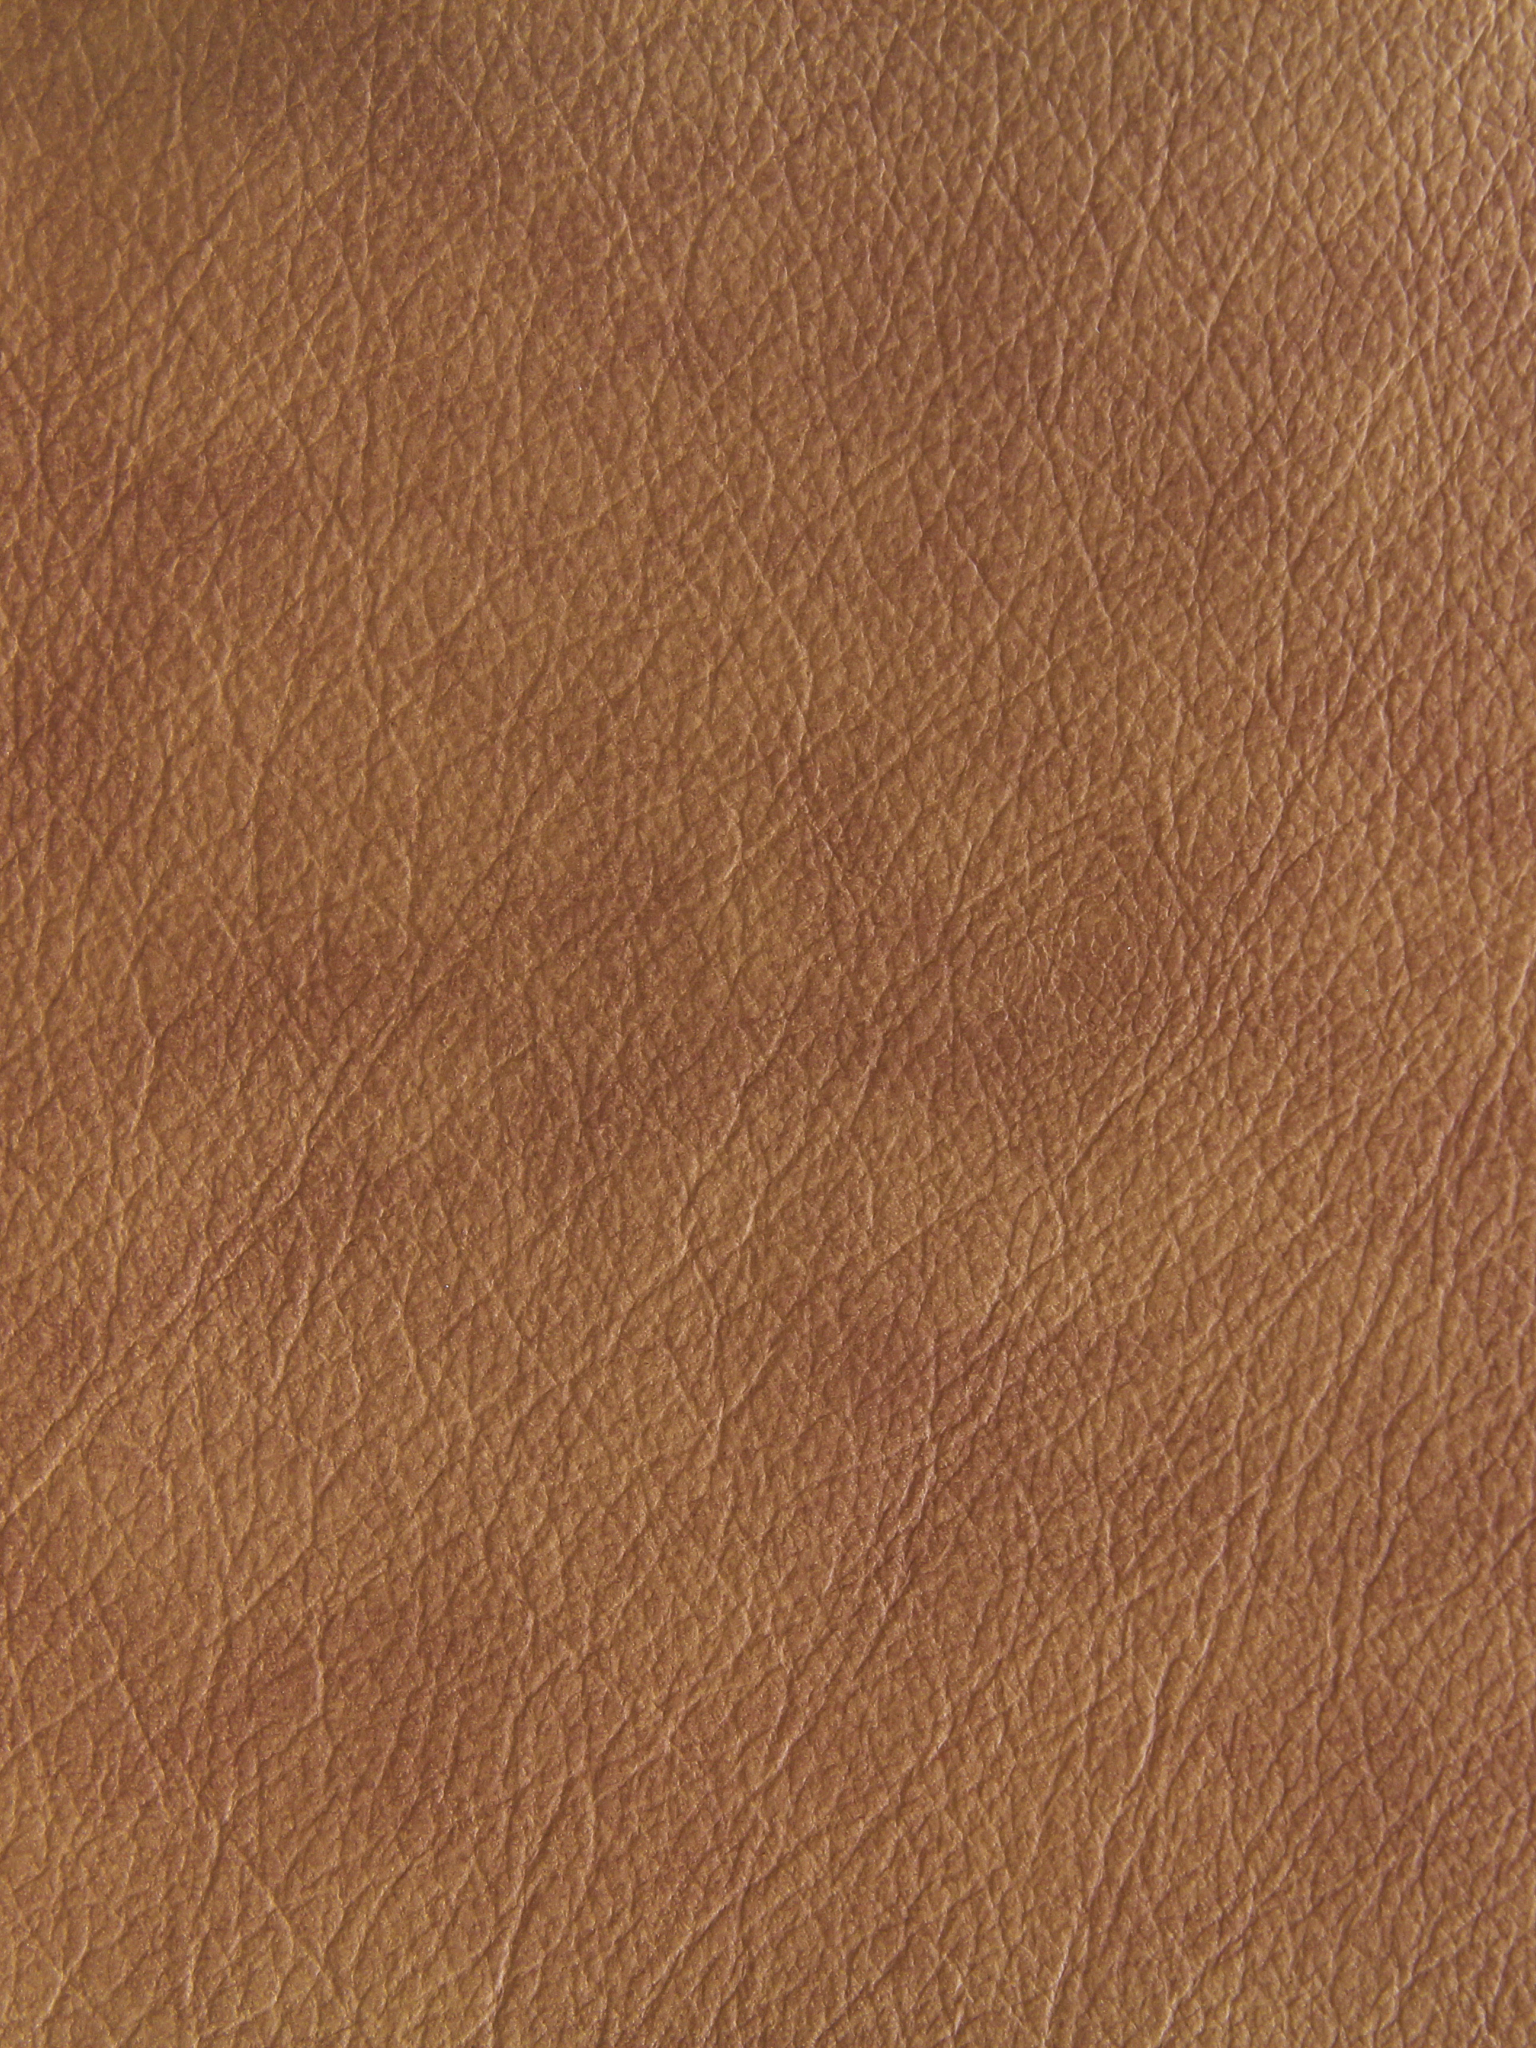 Free download texturex com leather textures coudy brown leather texture wallpaper [4608x3456] for your Desktop, Mobile & Tablet. Explore Leather Textured Wallpaper. Black Leather Wallpaper, Leather Wallpaper Wallcoverings, Leather